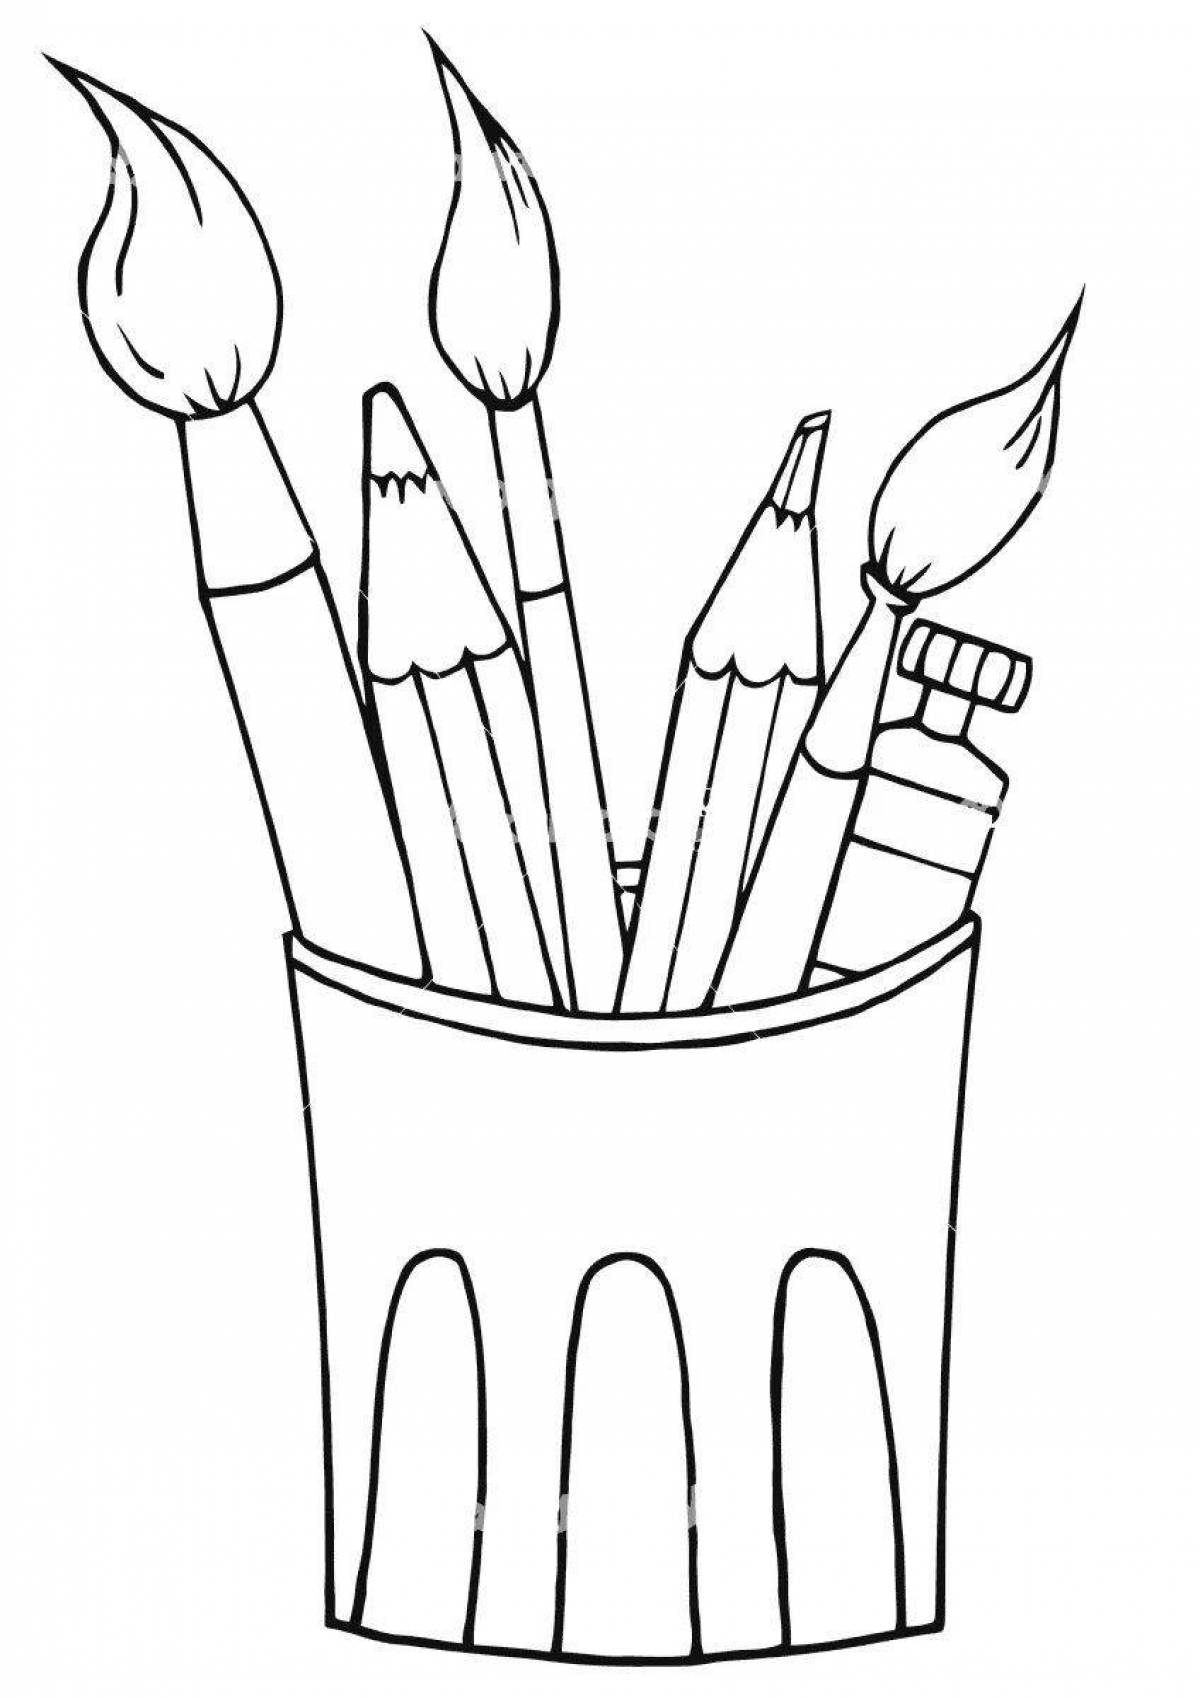 Color-frenzy glass coloring page with pencils